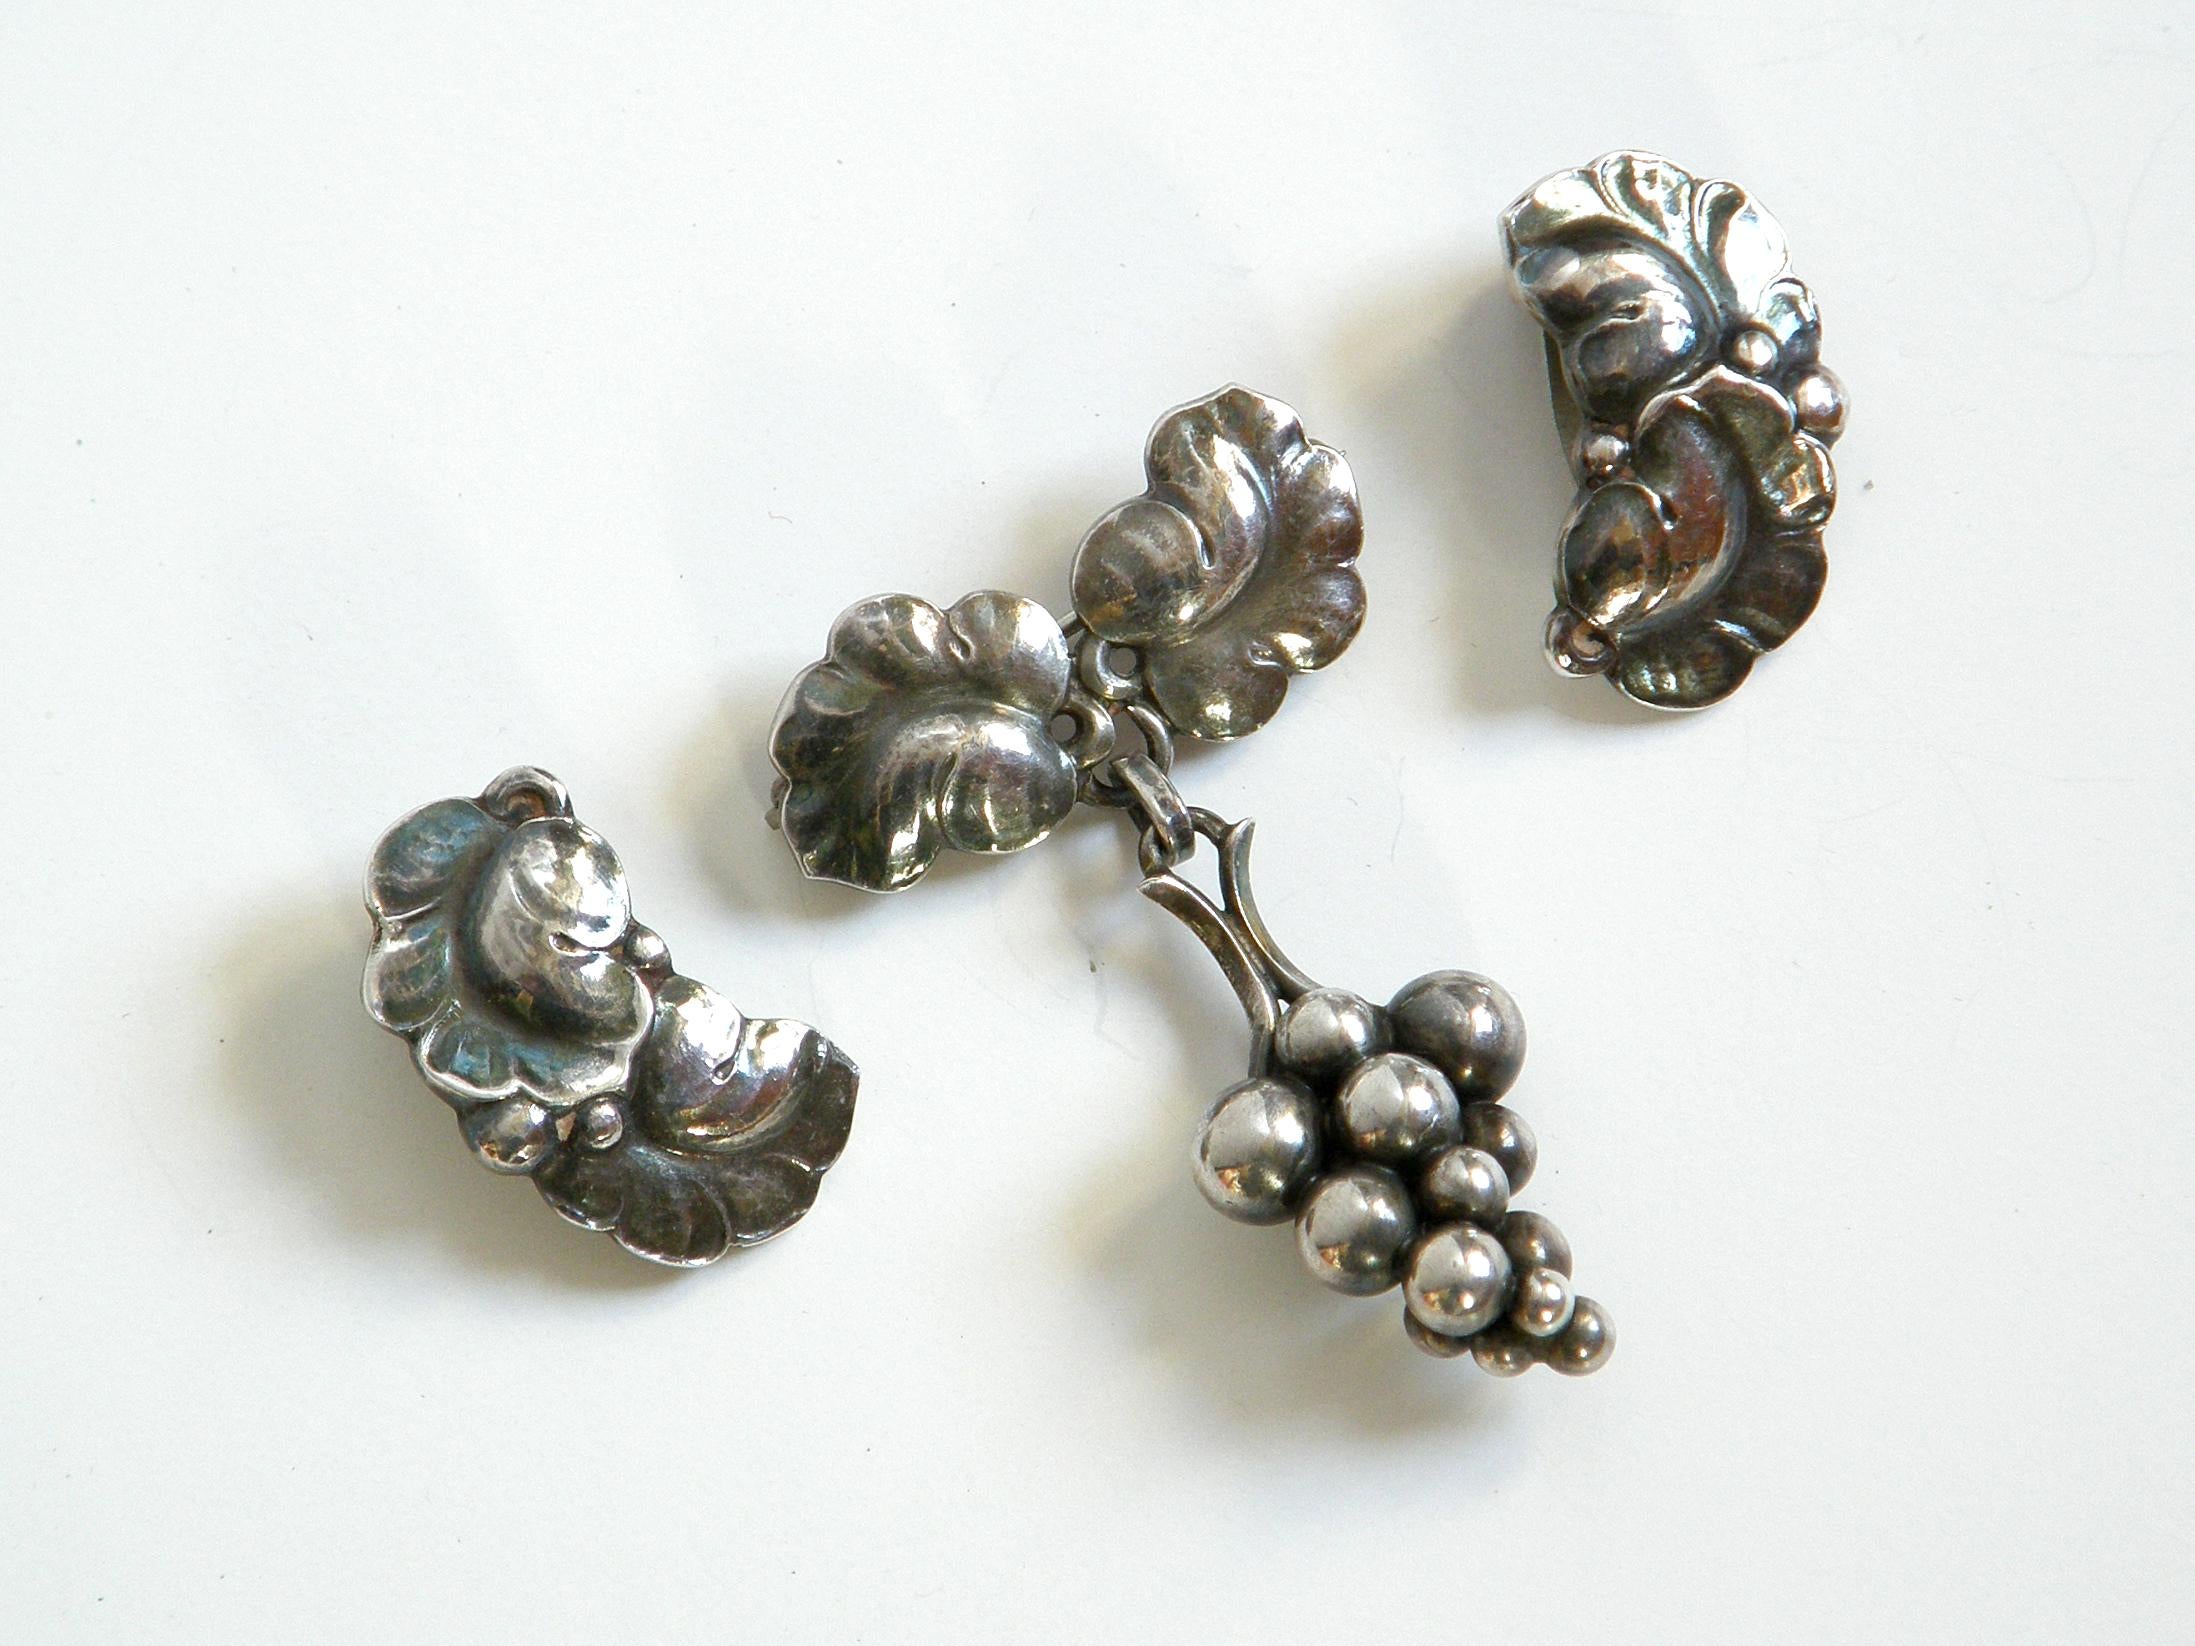 This sterling pin and earrings set is one of the classic designs of Georg Jensen. The design, known as Moonlight Grapes, features a brooch with a three-dimensional cluster of grapes hanging from curling leaves with a hammered finish. The matching